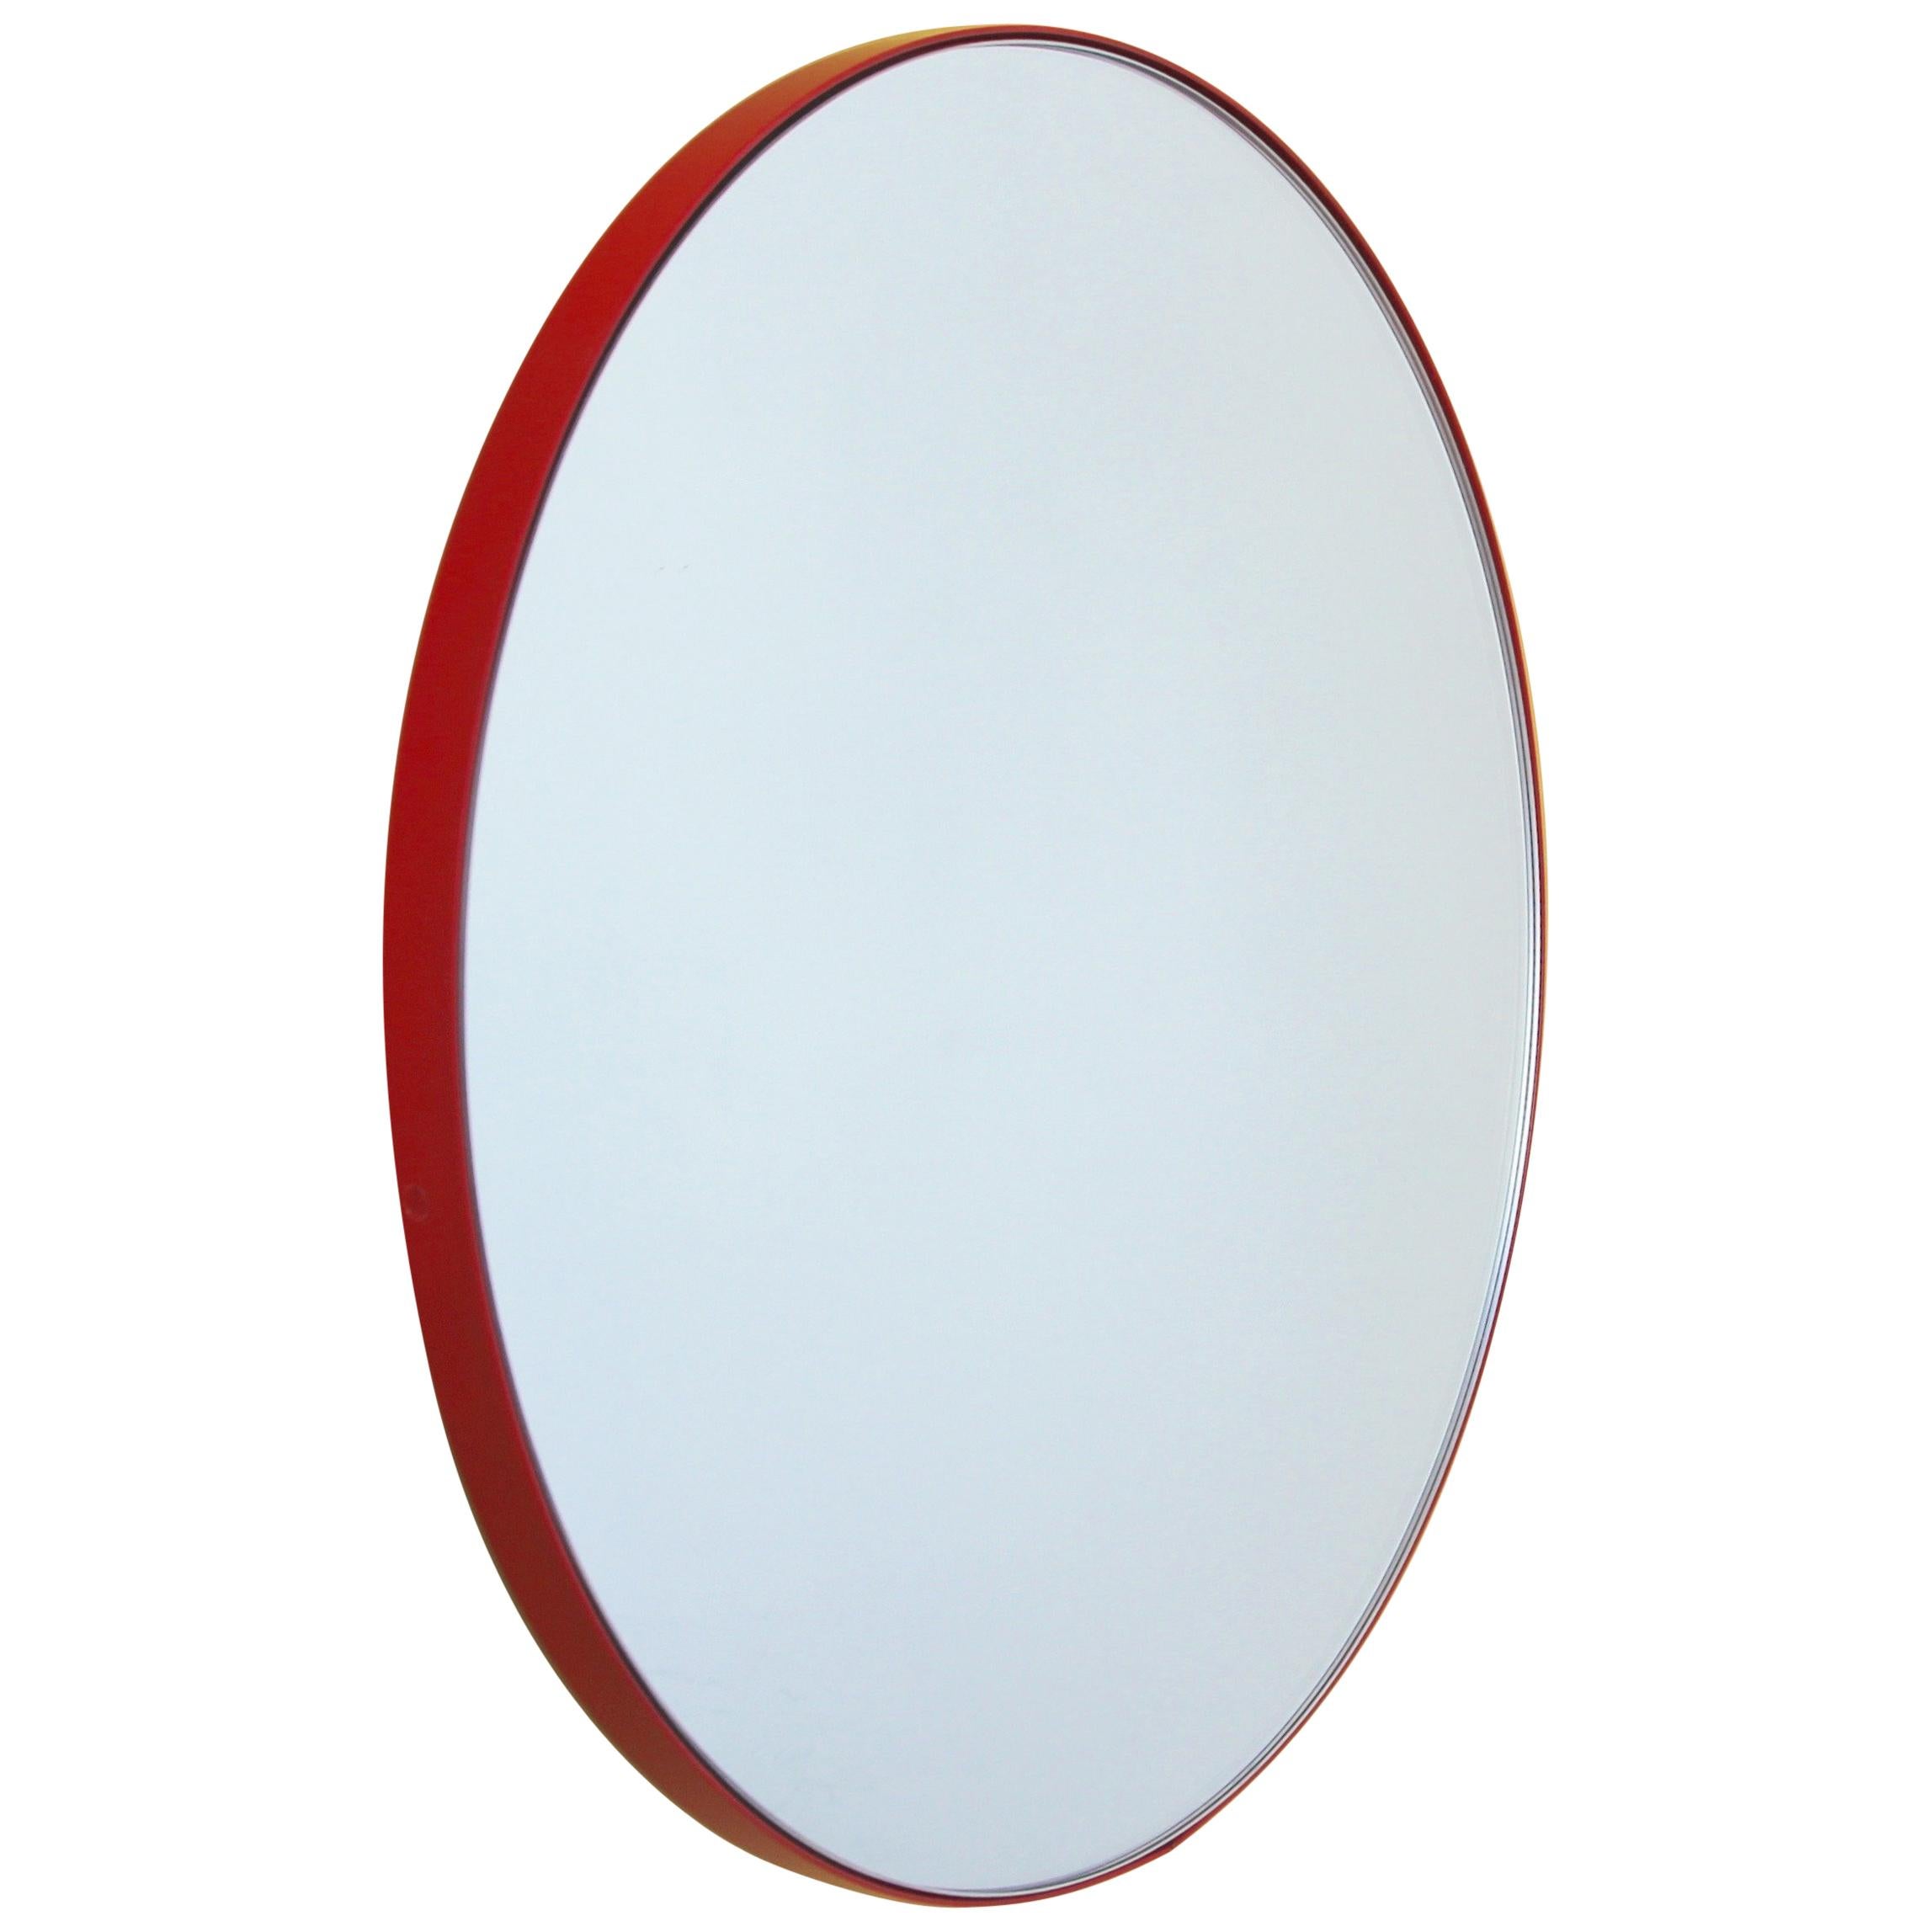 Orbis Round Contemporary Handcrafted Mirror with Red Frame, Large